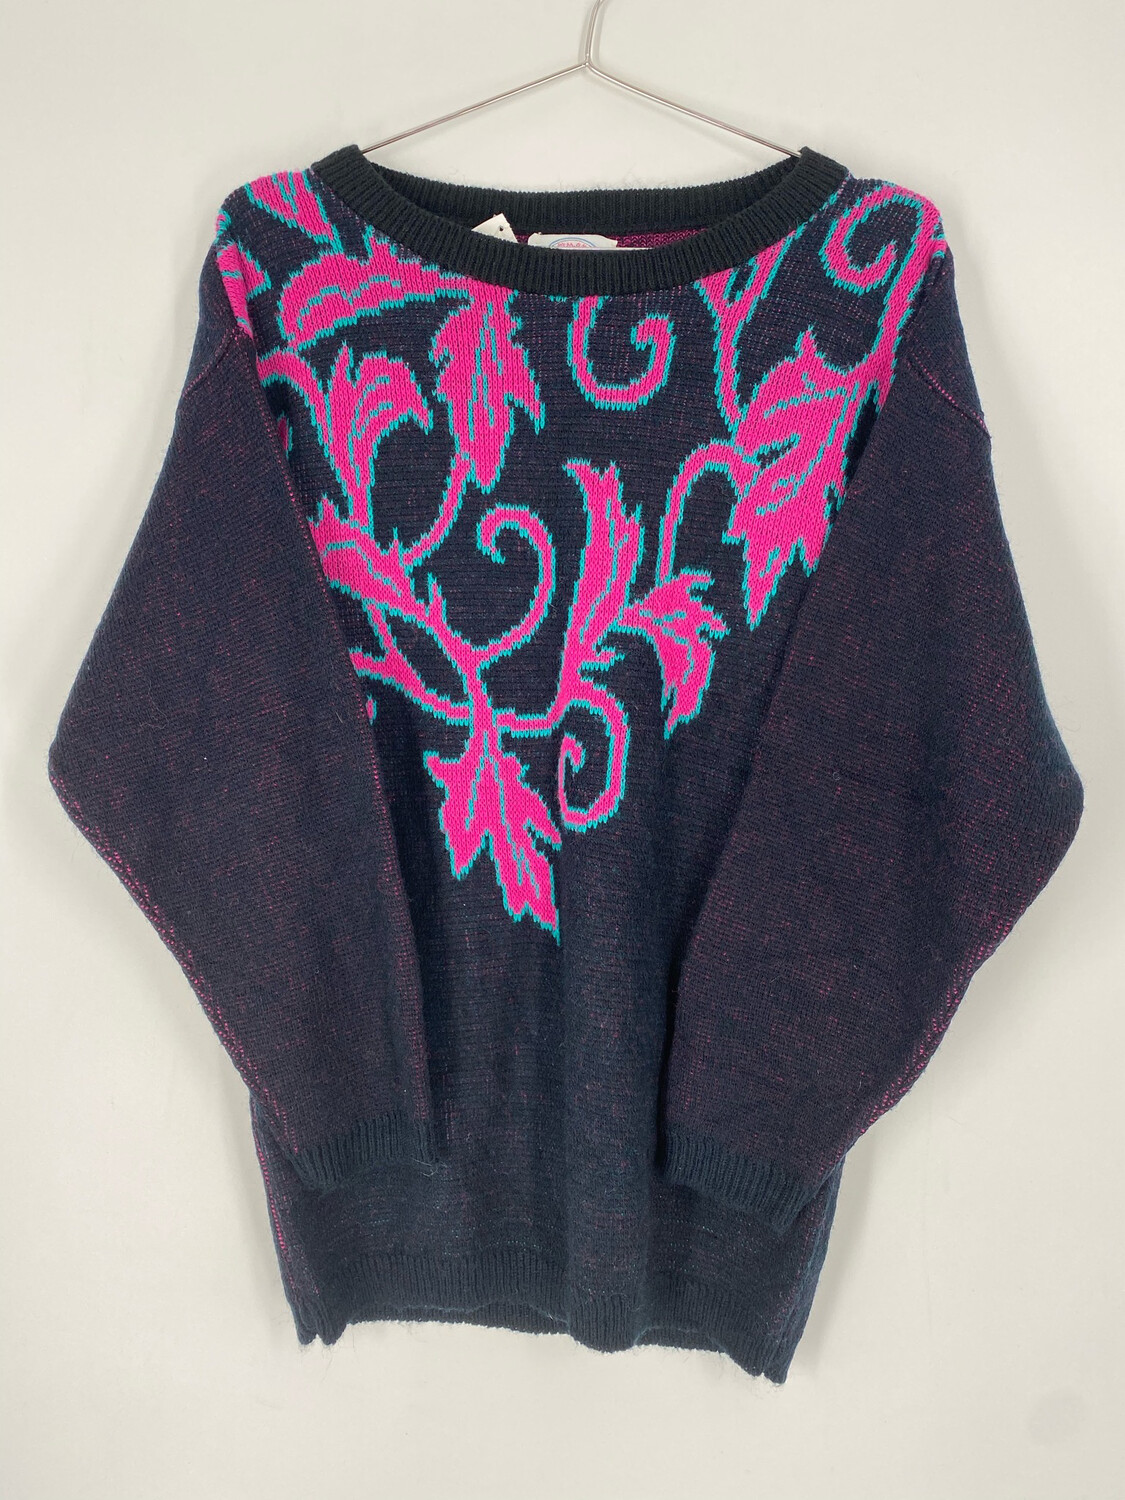 Thackery 80’s Style Printed Sweater Size S